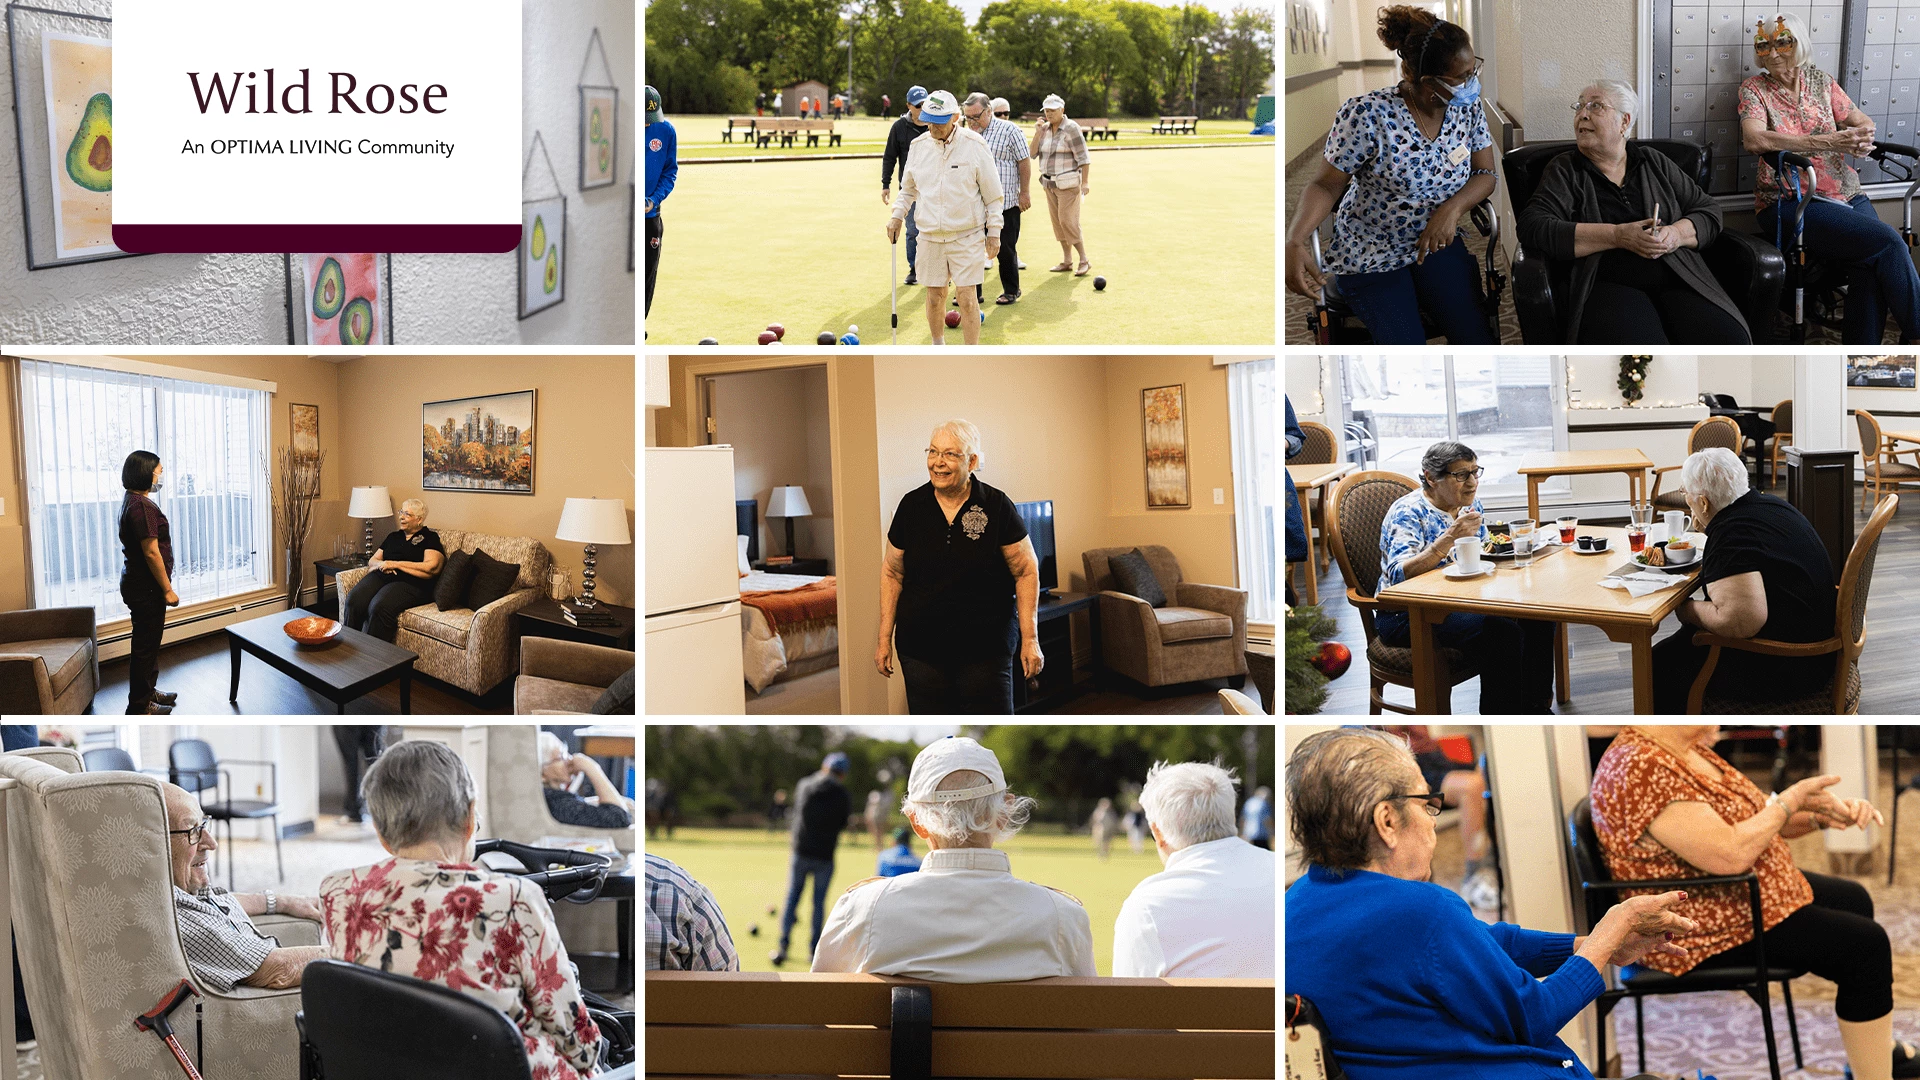 Wild Rose residents enjoying time together, outdoor activities, dining, and friendship with staff.